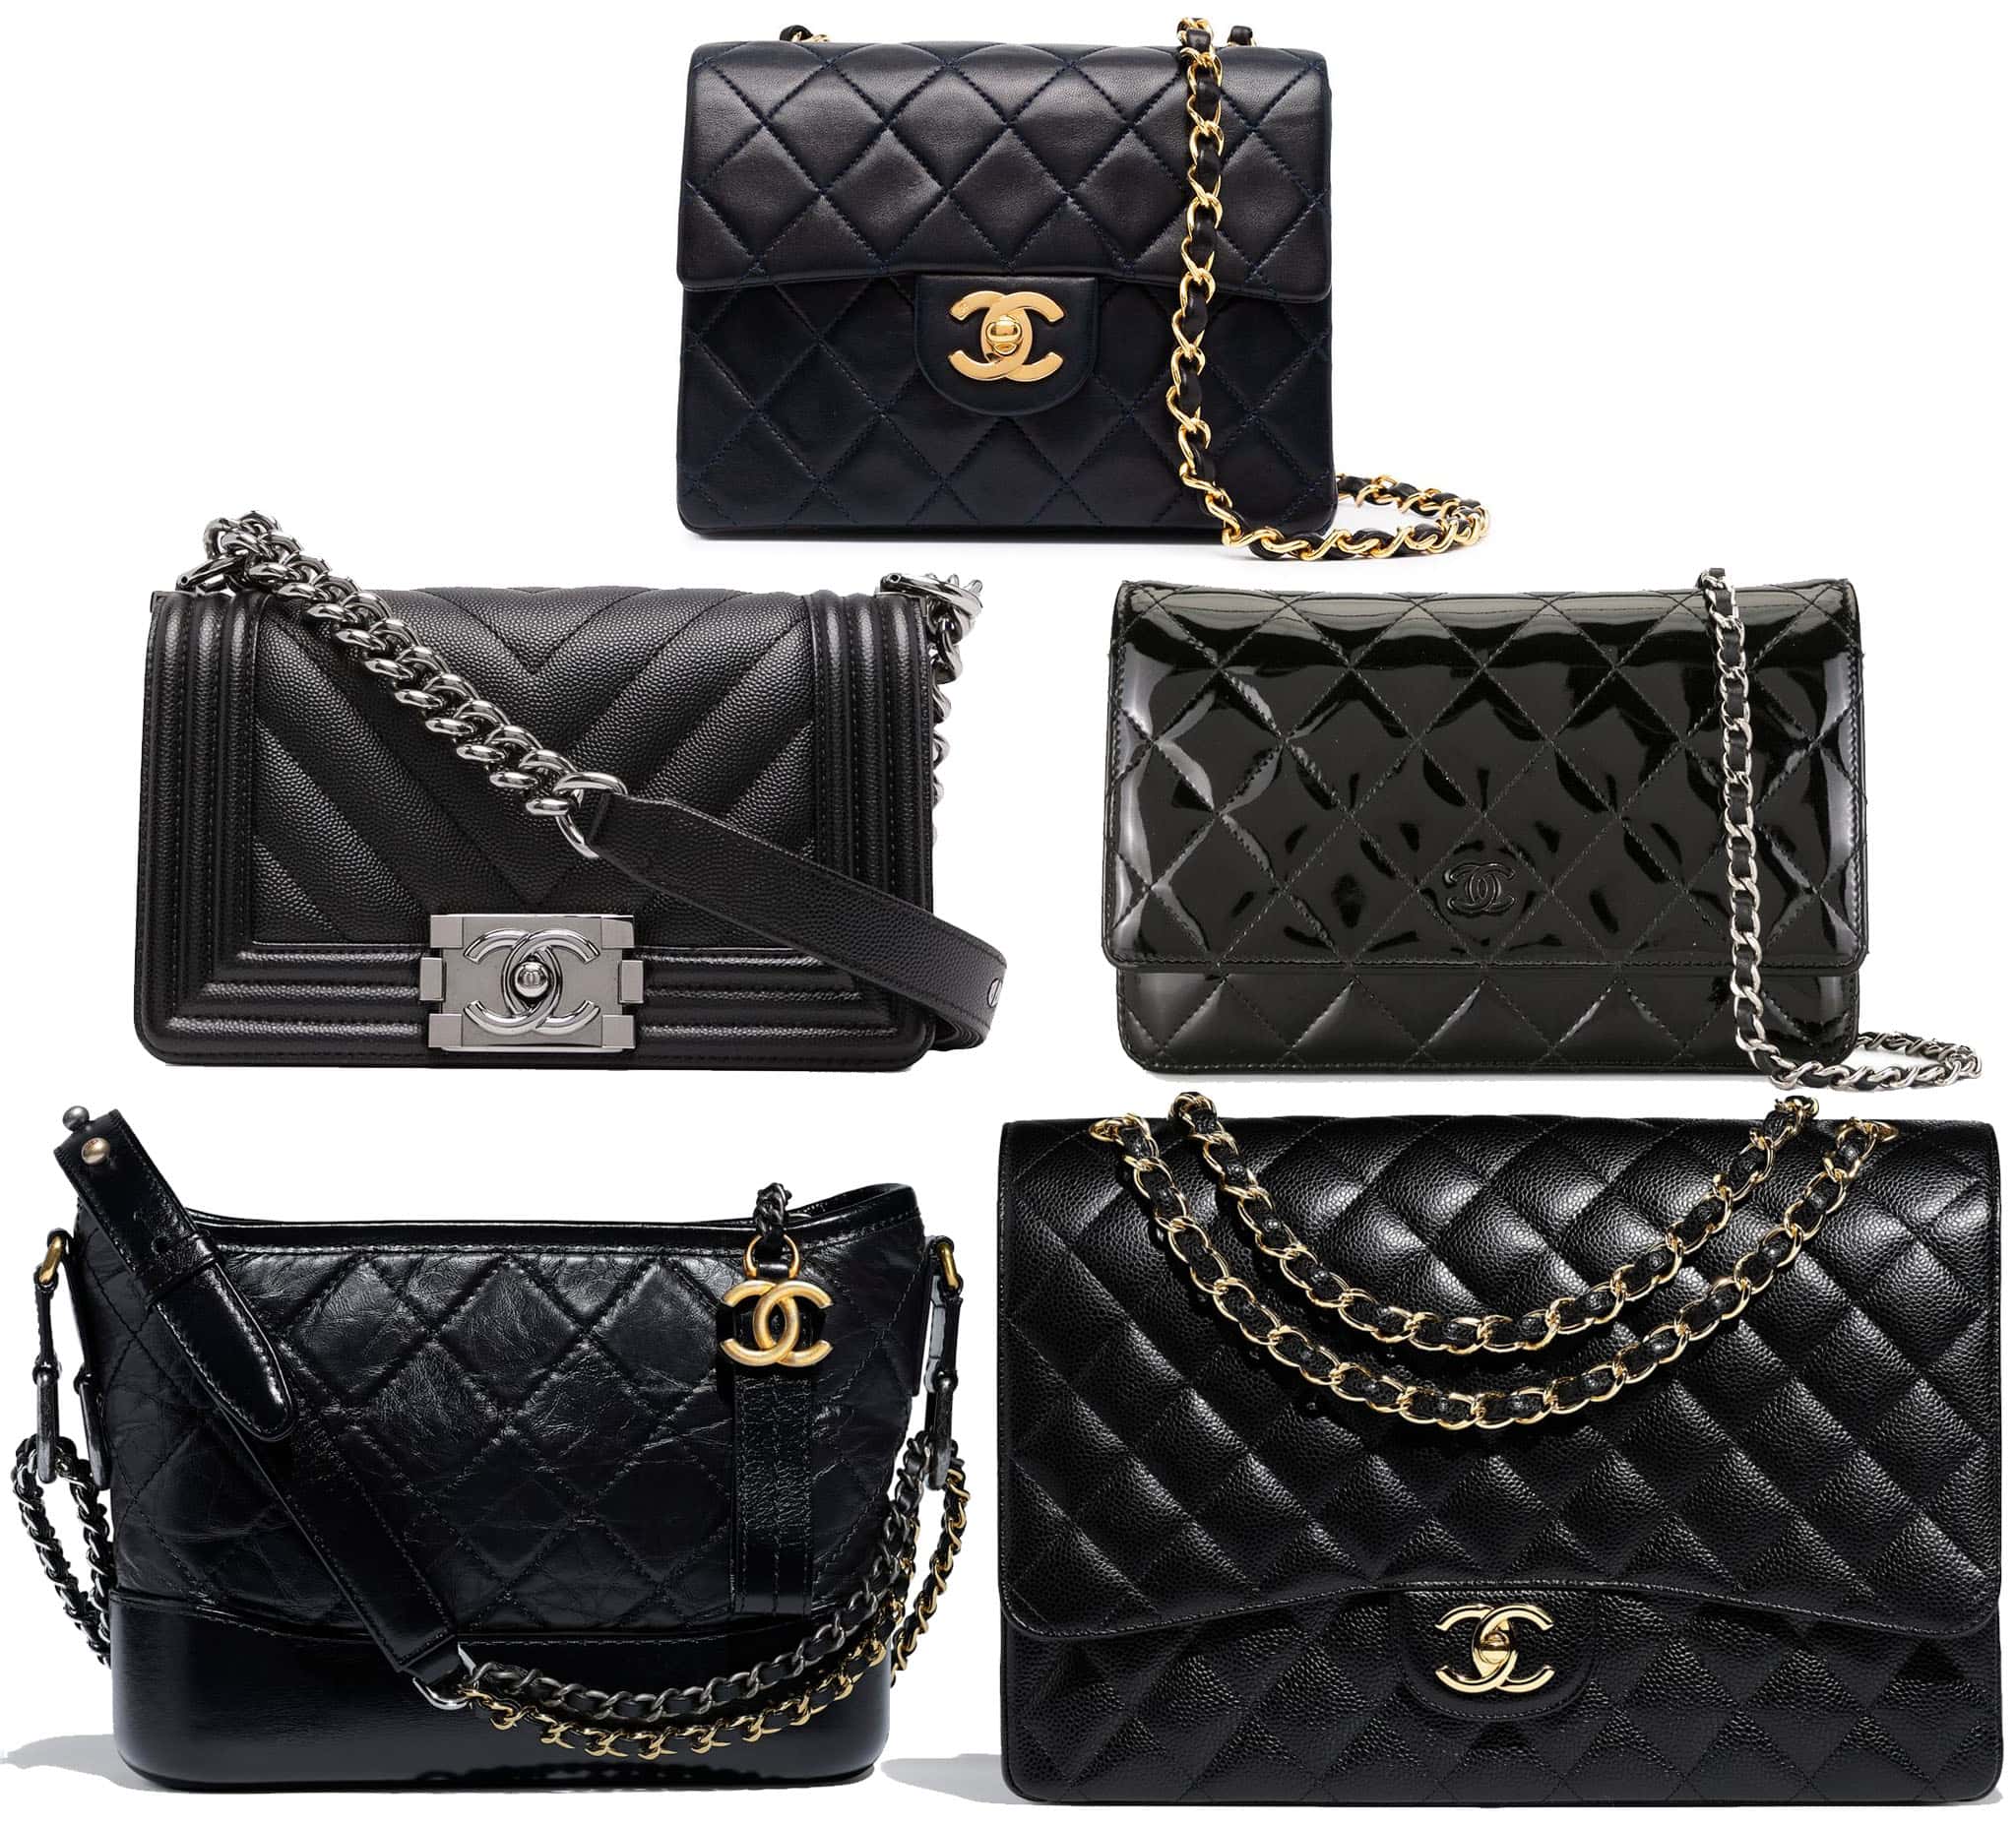 (Top) Chanel Classic Small Flap Bag, (middle) Chanel Small Boy Flap Bag and Chanel WOC, (bottom) Chanel Gabrielle Small Hobo Bag and Chanel Classic Maxi Flap Bag